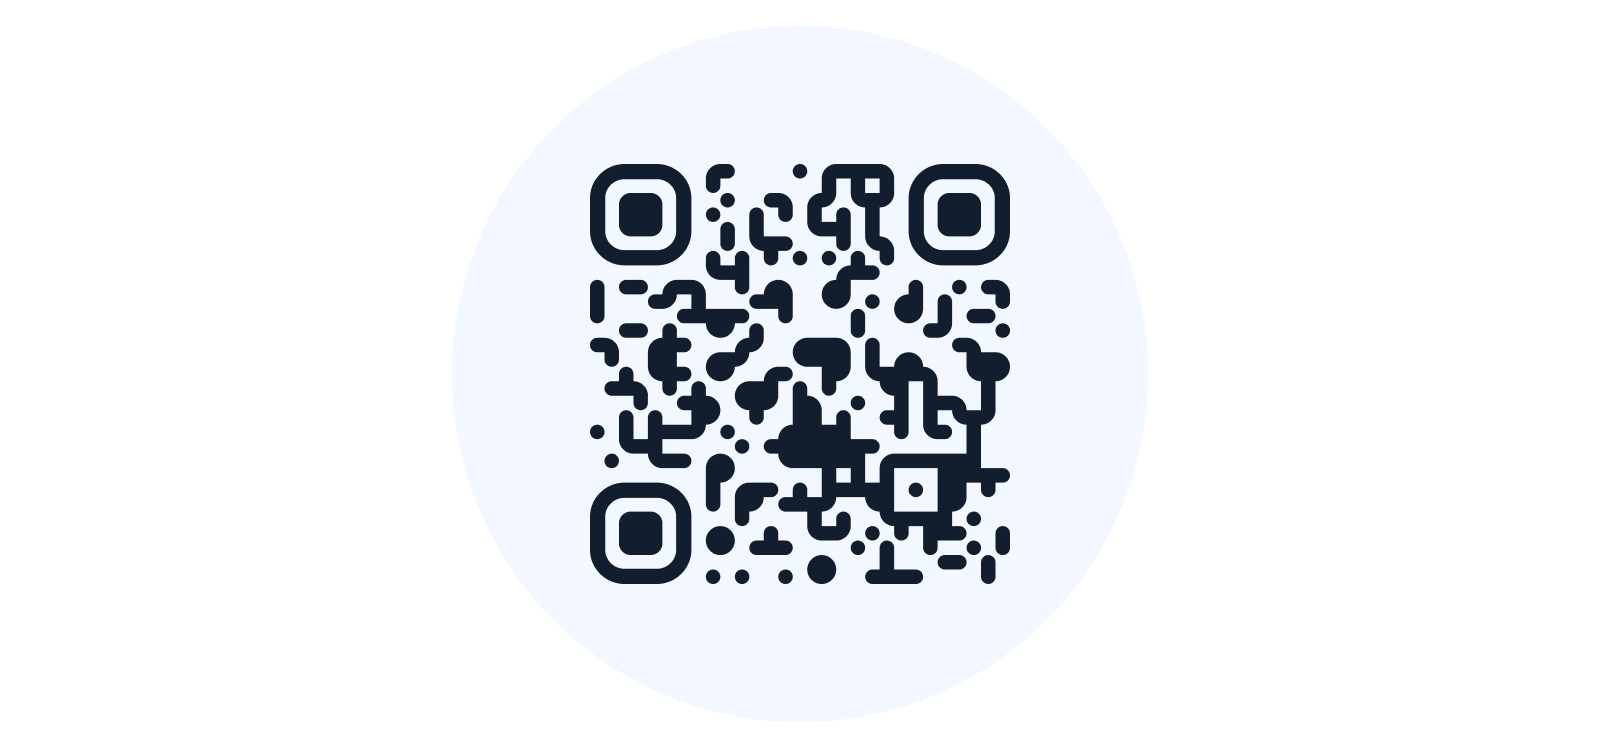 To contact TagPoint scan QR code